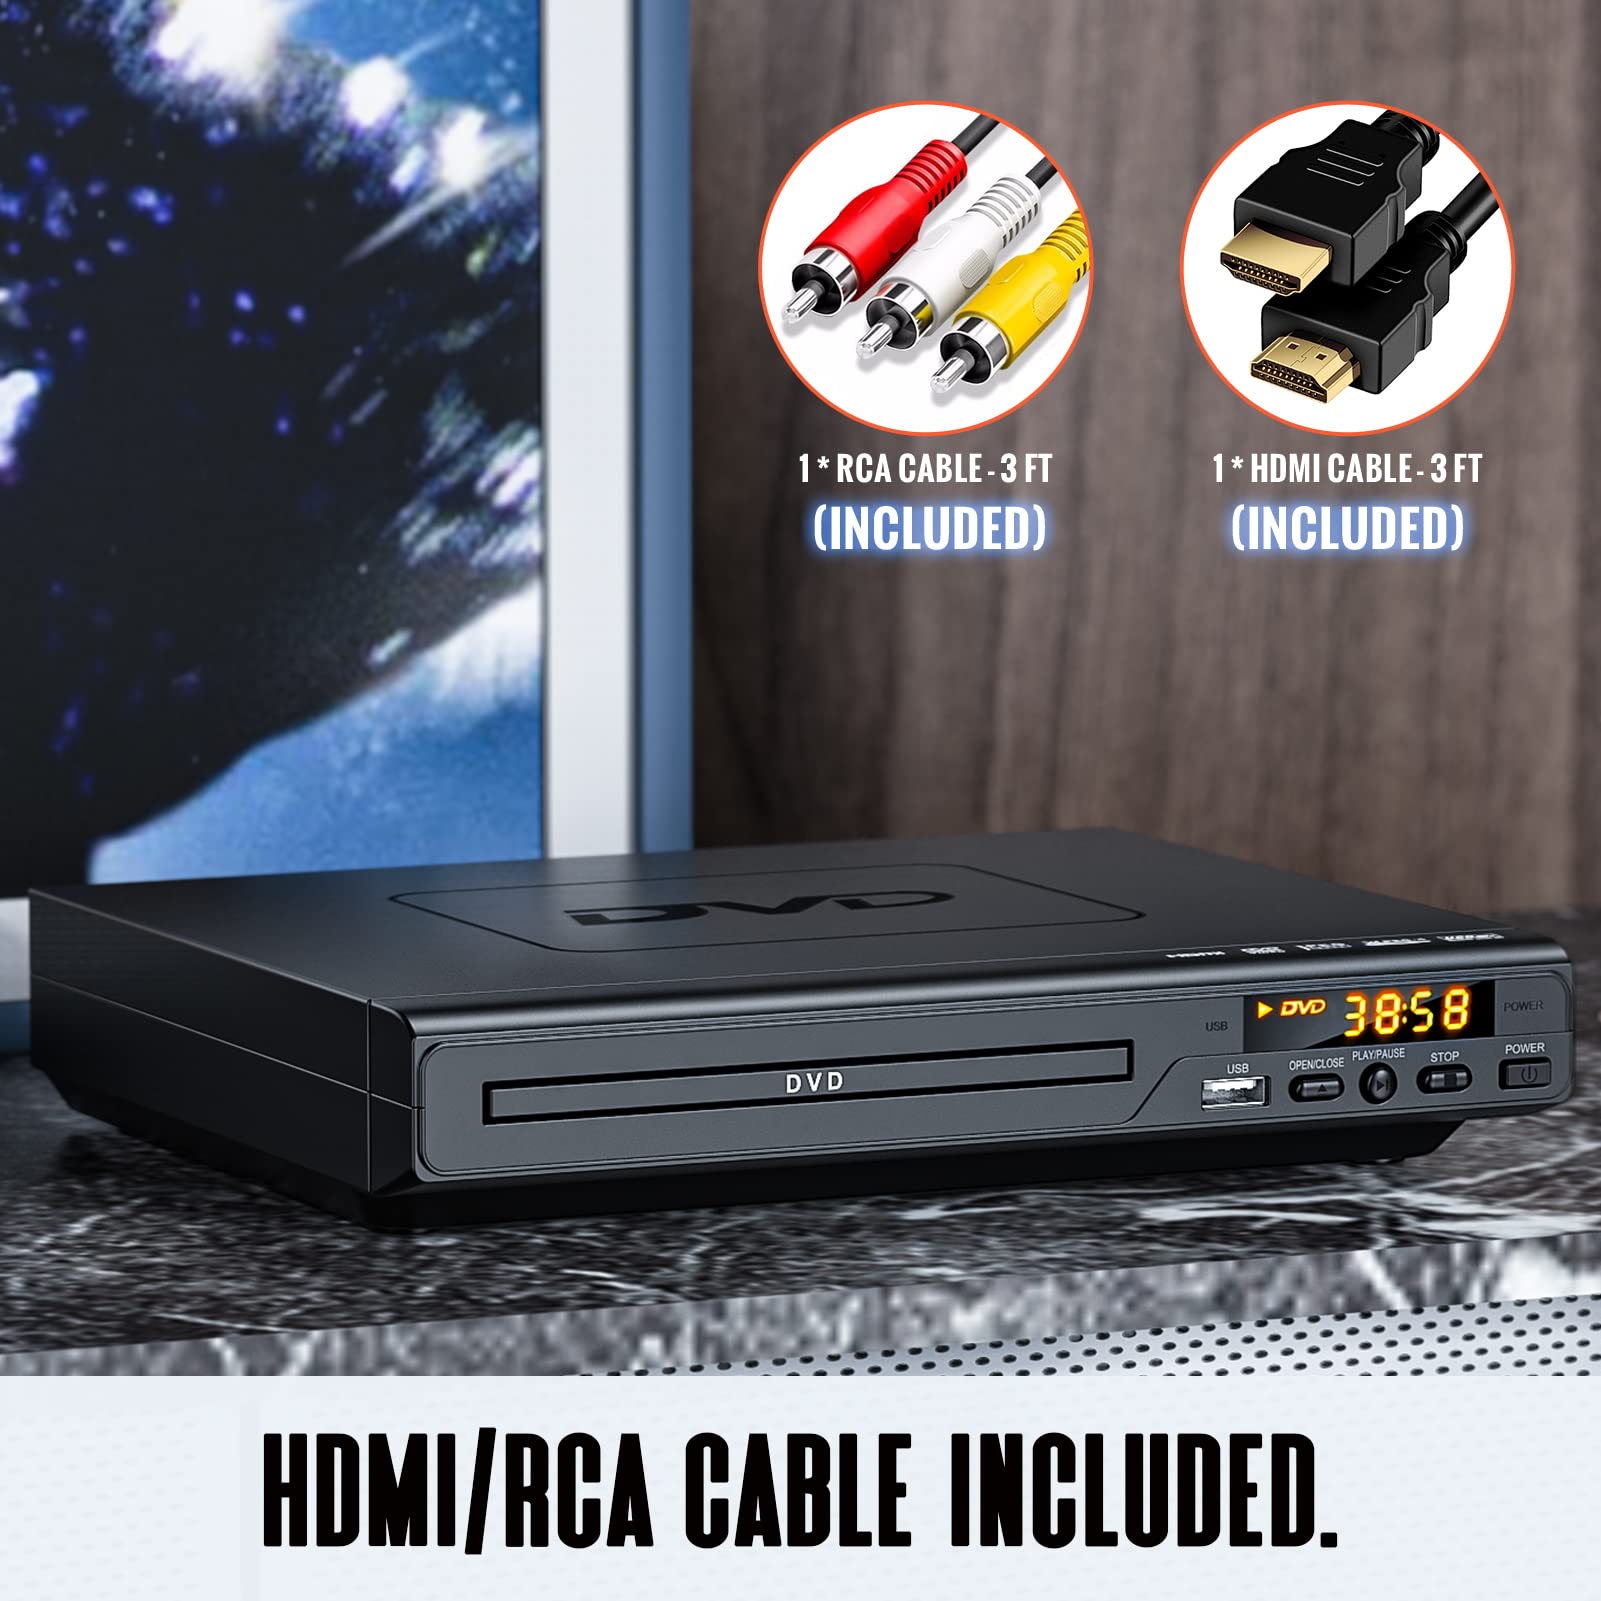 DVD Players for TV with HDMI, DVD Players That Play All Regions, Simple DVD Player for Elderly, CD Player for Home Stereo System, HDMI and RCA Cable Included